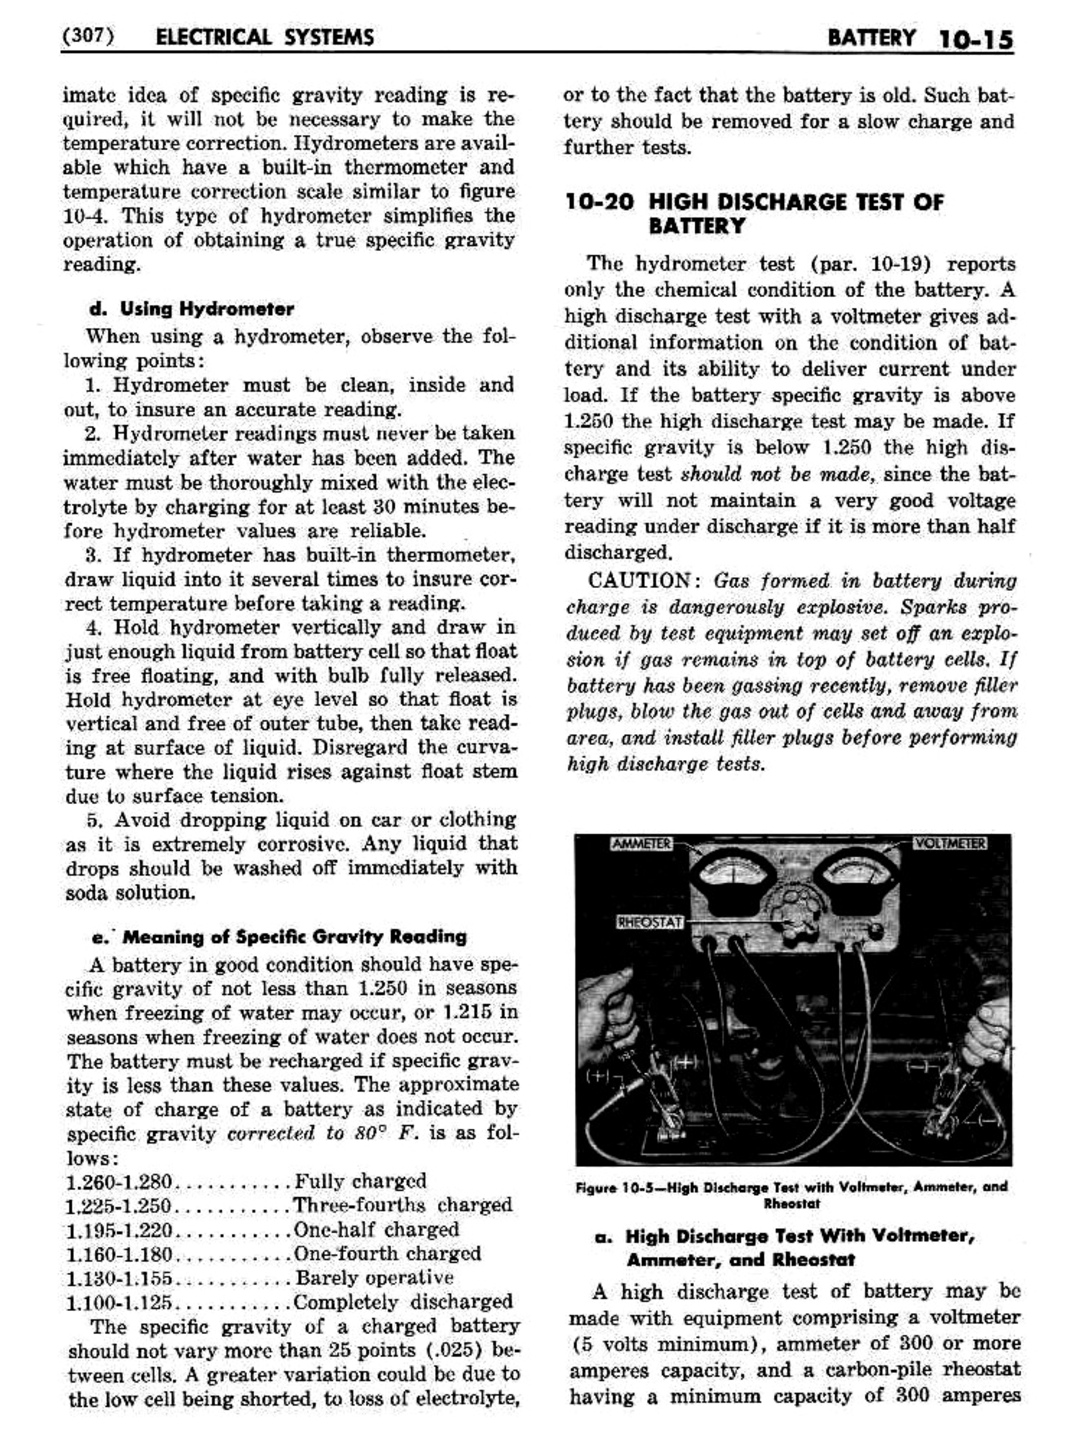 n_11 1951 Buick Shop Manual - Electrical Systems-015-015.jpg